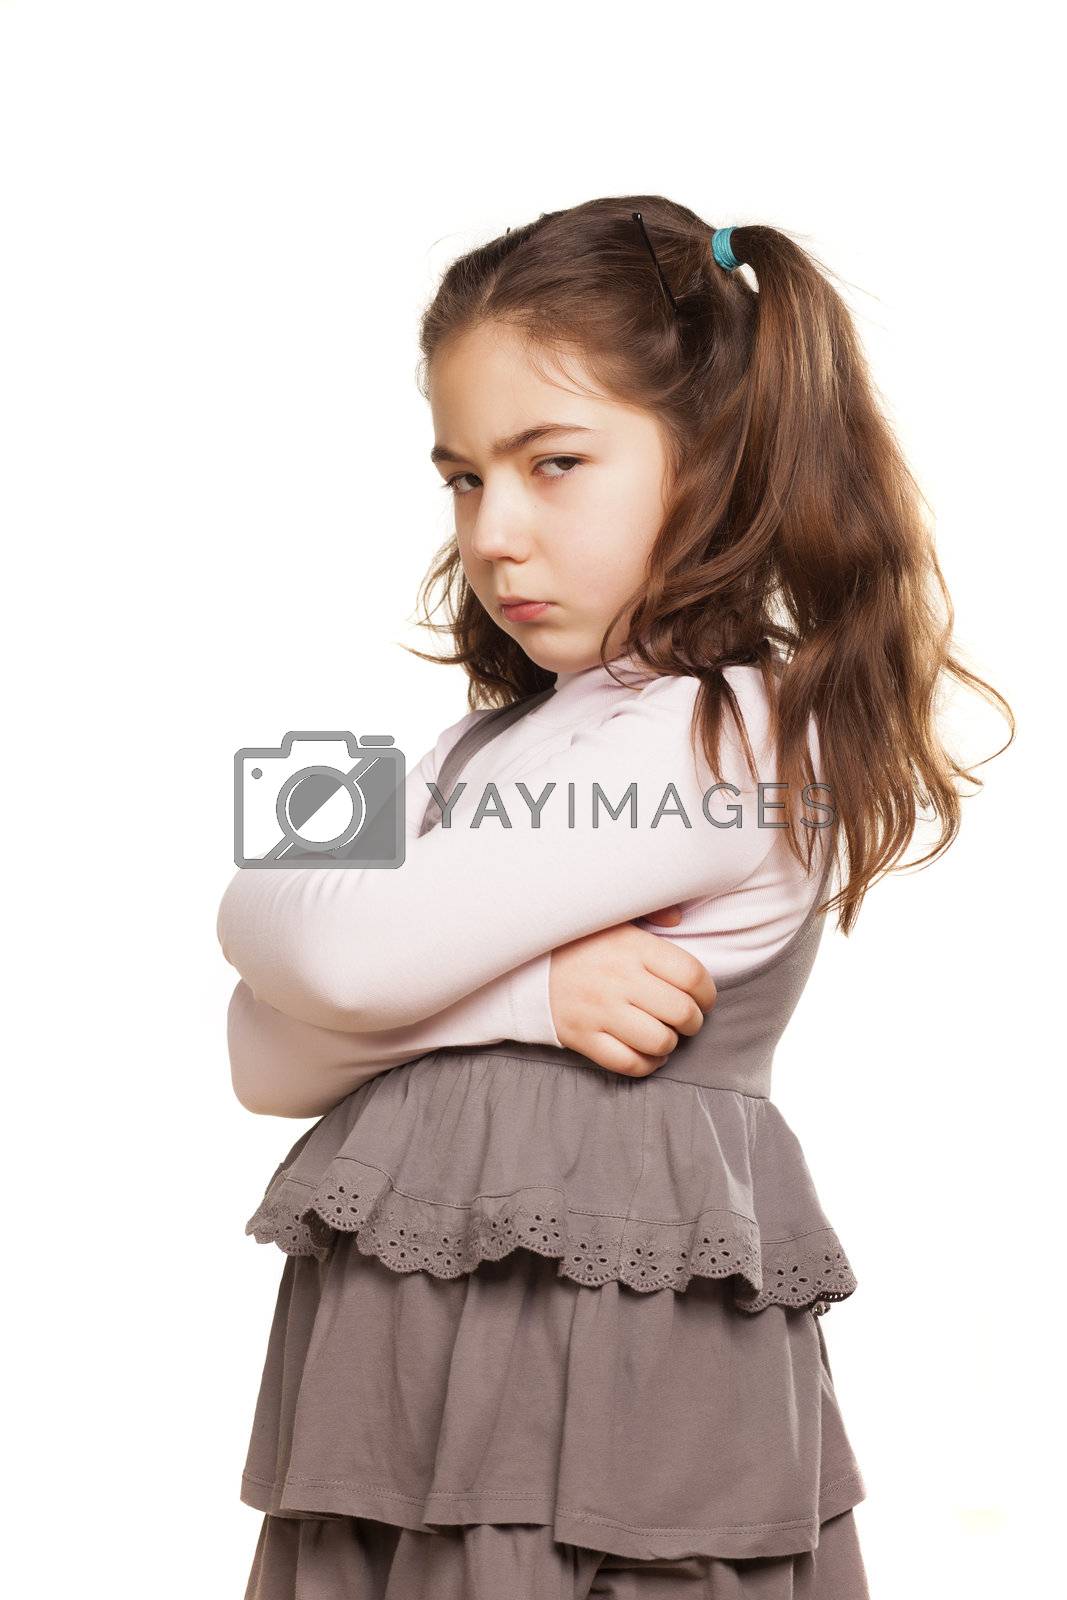 Royalty free image of angry little girl by Vladimirfloyd